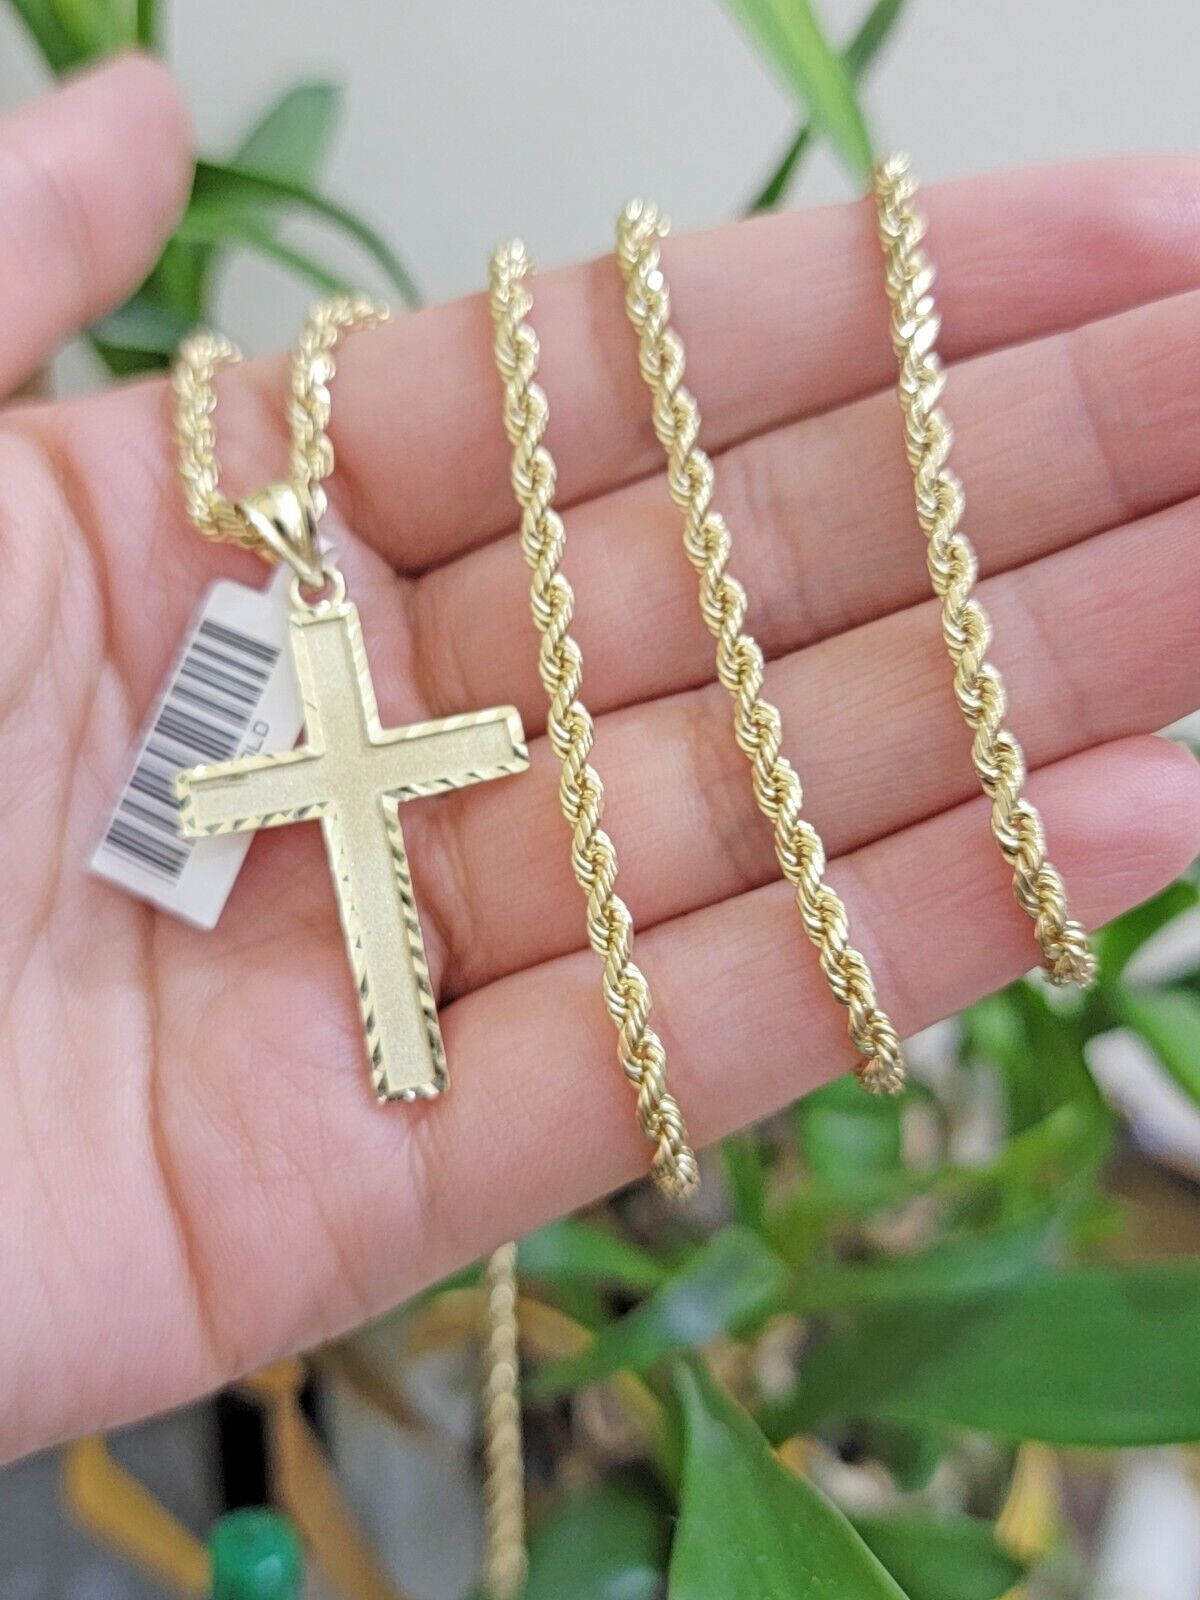 10k Yellow Gold Rope Chain & Cross Charm Set REAL 10KT 28 Inch necklace pendant